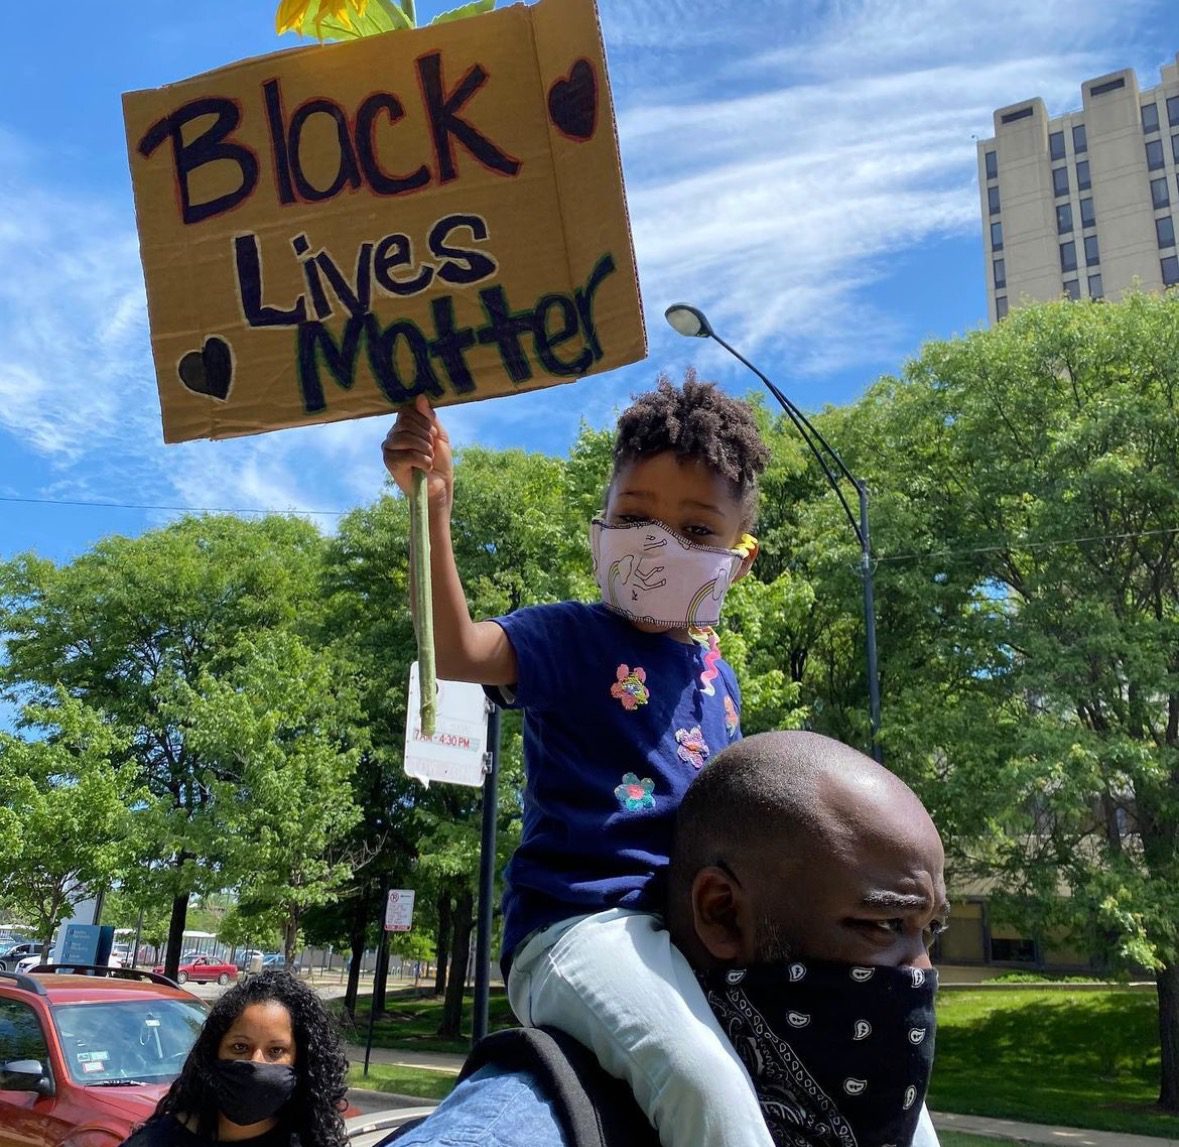 Photo shows a young child on Principal Jonas Cleaves' shoulders. They are in the middle of a protest outside and the child holds a sign that says "Black Lives Matter". Cleaves wears a black bandana over his mouth and the child has a pink mask on.